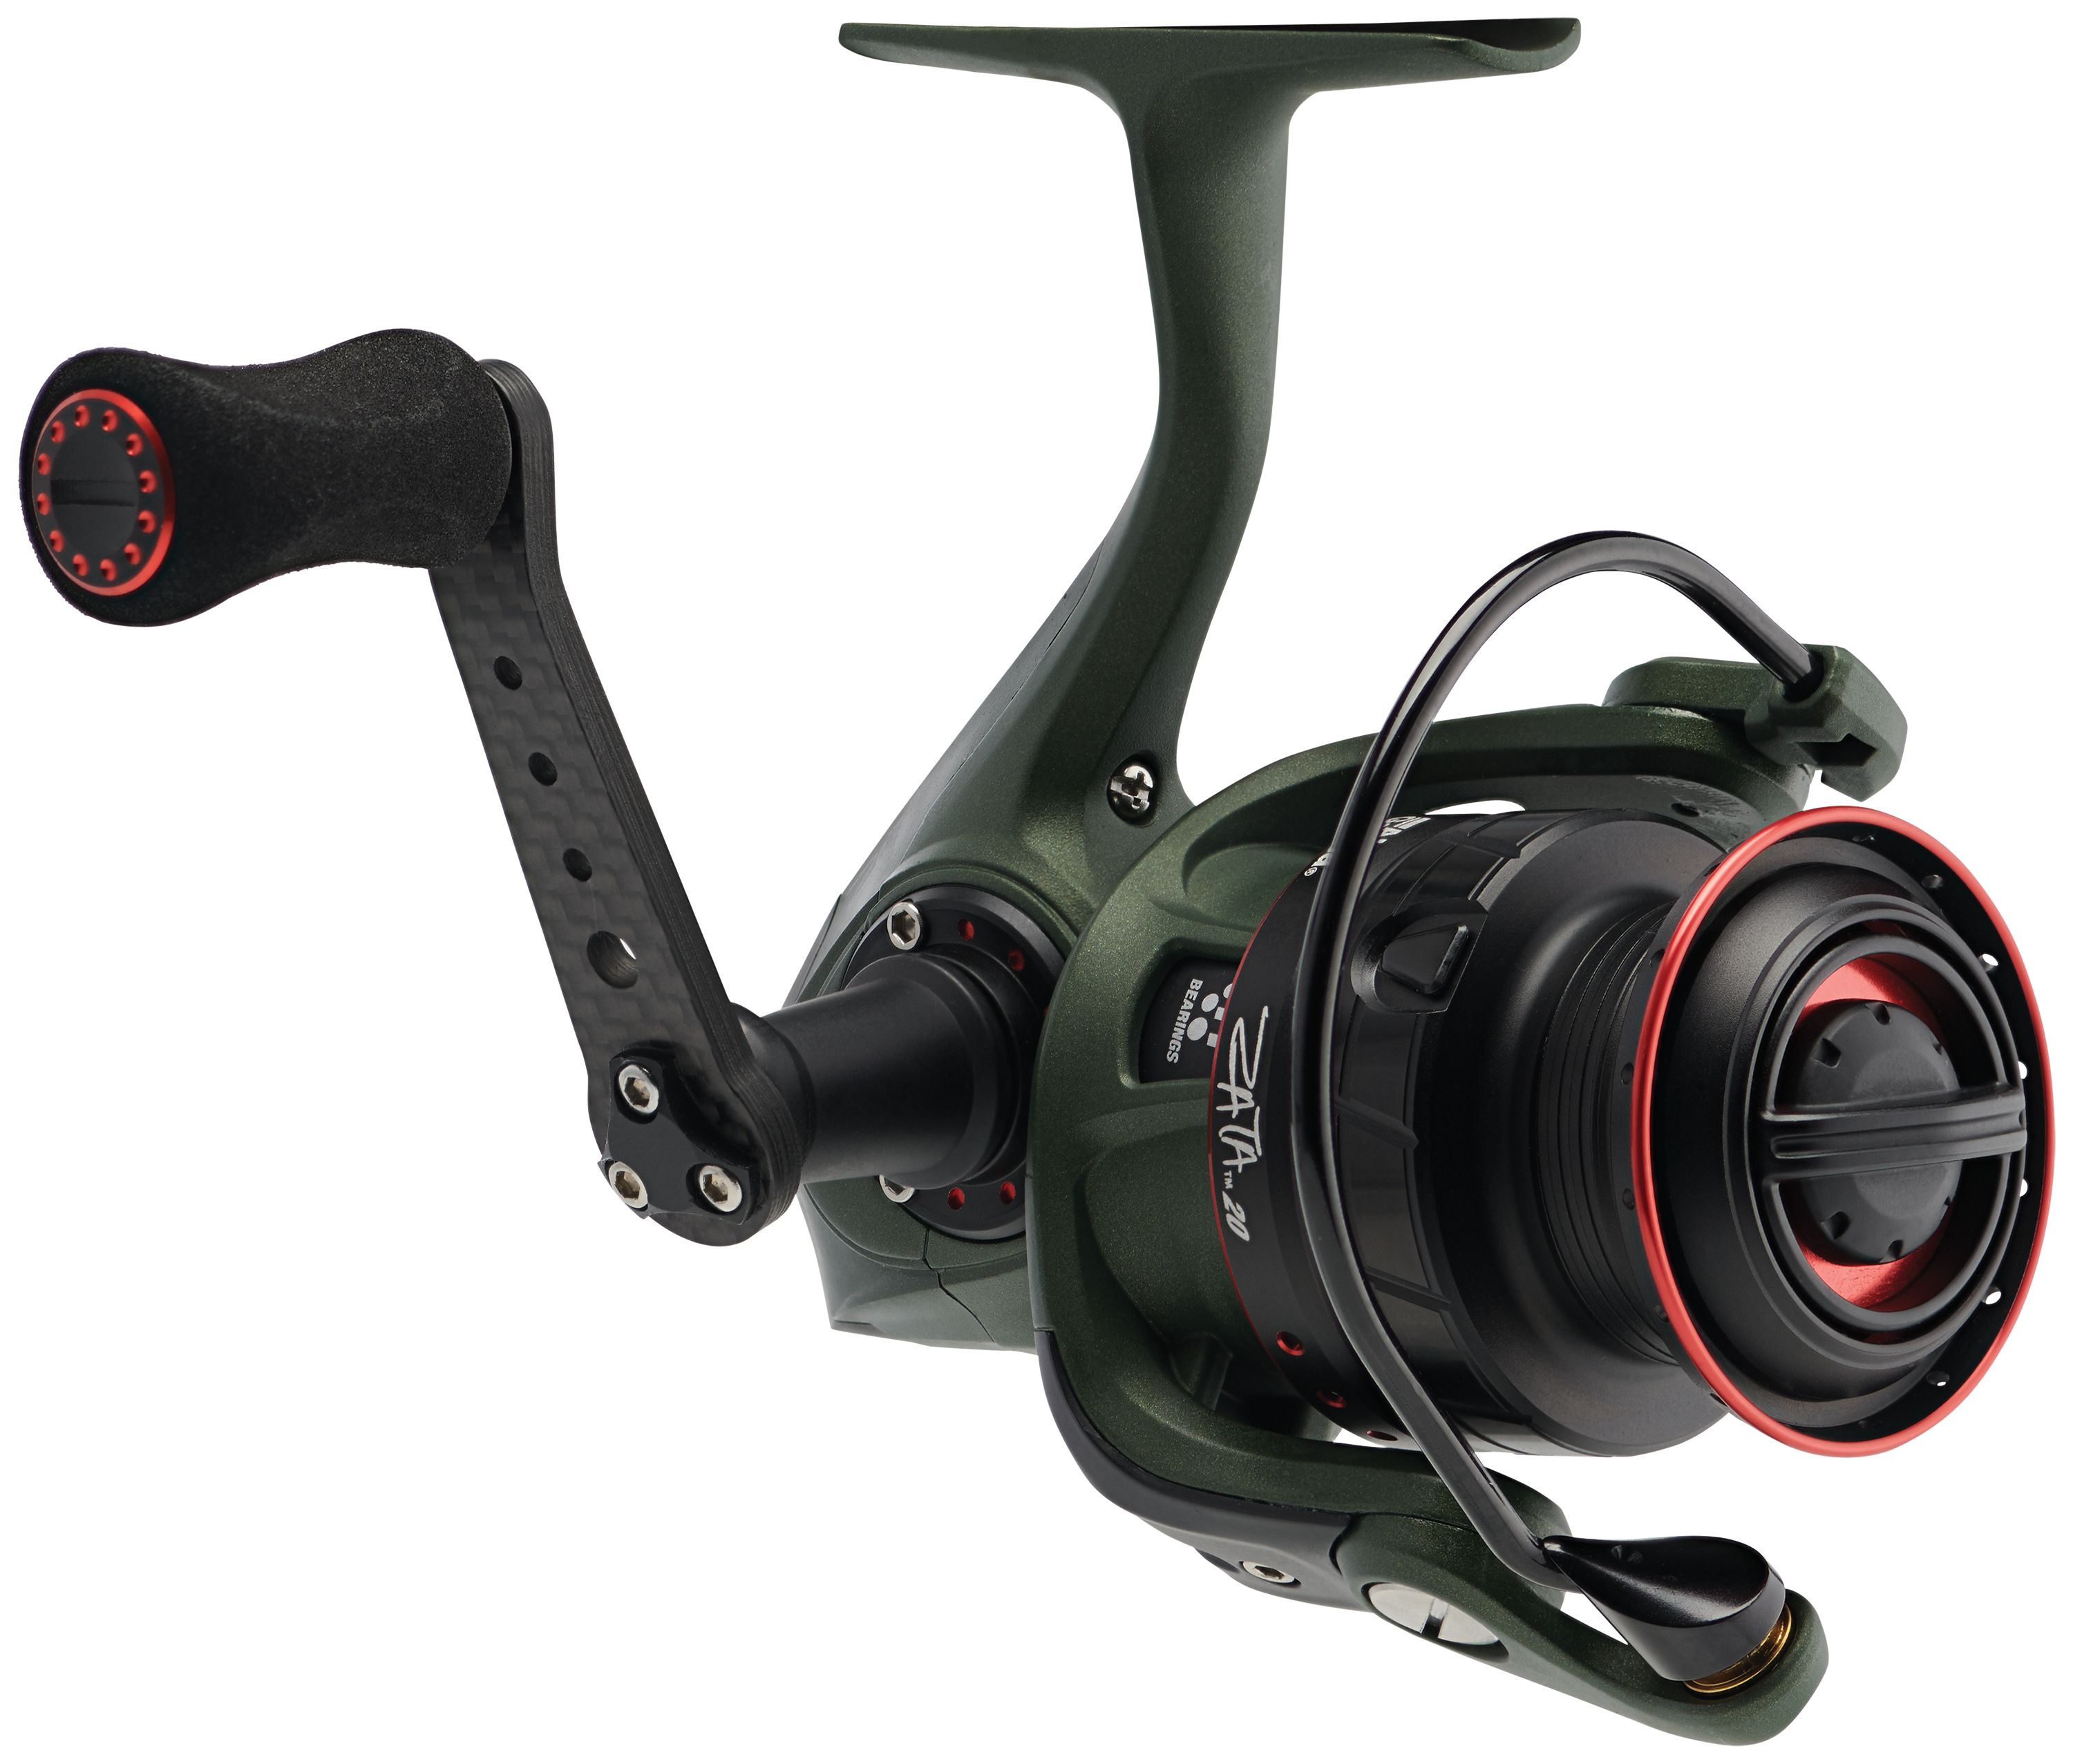 abu garcia fishing reels, abu garcia fishing reels Suppliers and